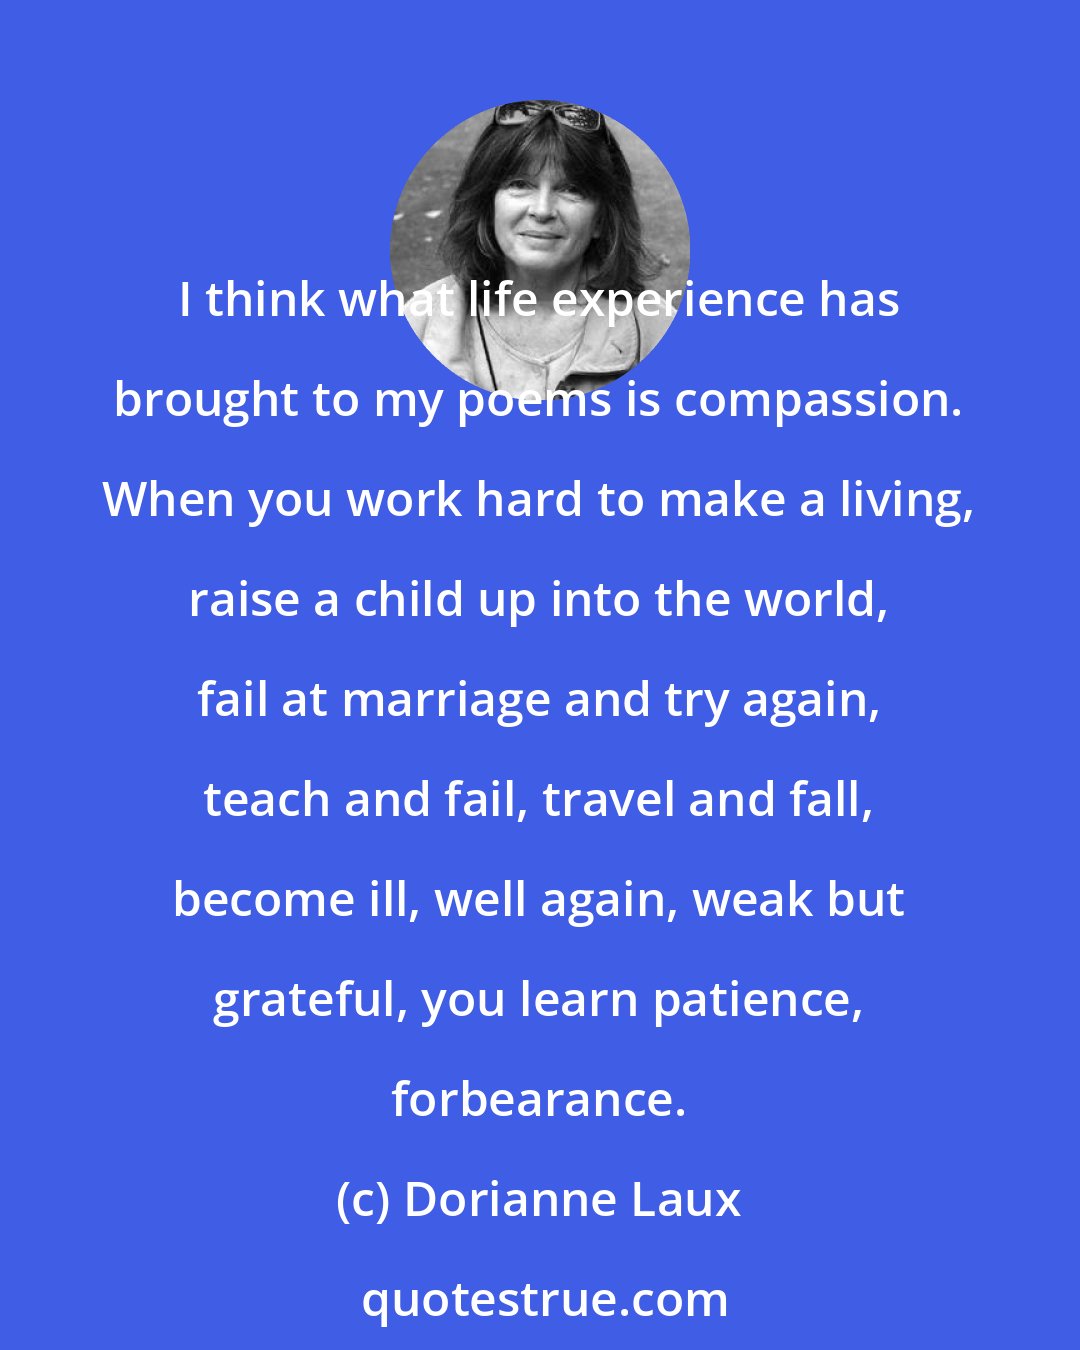 Dorianne Laux: I think what life experience has brought to my poems is compassion. When you work hard to make a living, raise a child up into the world, fail at marriage and try again, teach and fail, travel and fall, become ill, well again, weak but grateful, you learn patience, forbearance.